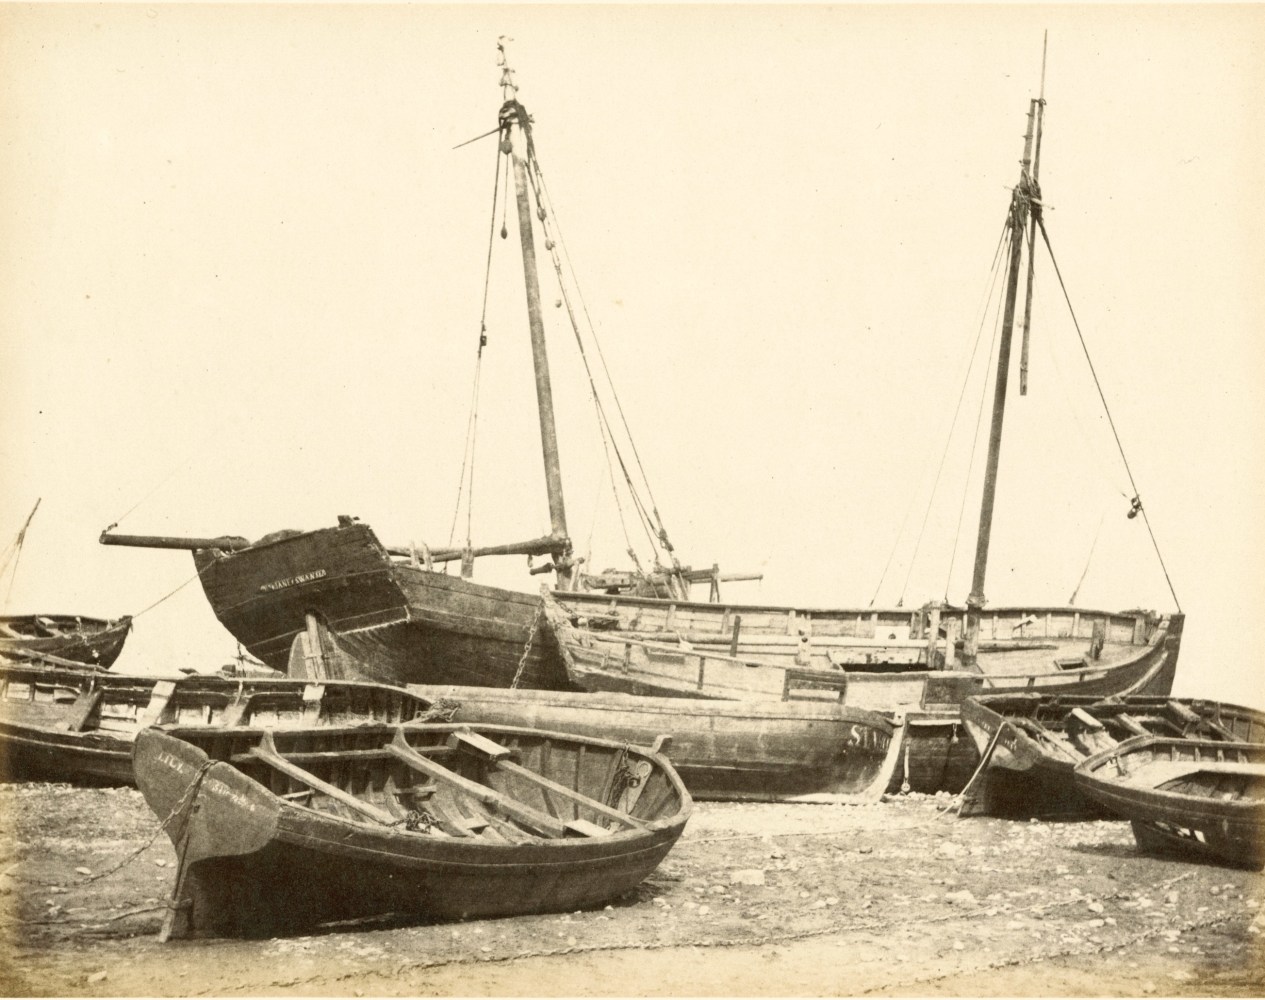 Hugh OWEN (English, 1808-1897) Oyster boats, Swansea Albumen print, 1860s-1870s, from a paper negative, before 1855 17.3 x 22.2 cm mounted on 26.0 x 28.3 cm album sheet Numbered &quot;60&quot; in pencil on mount